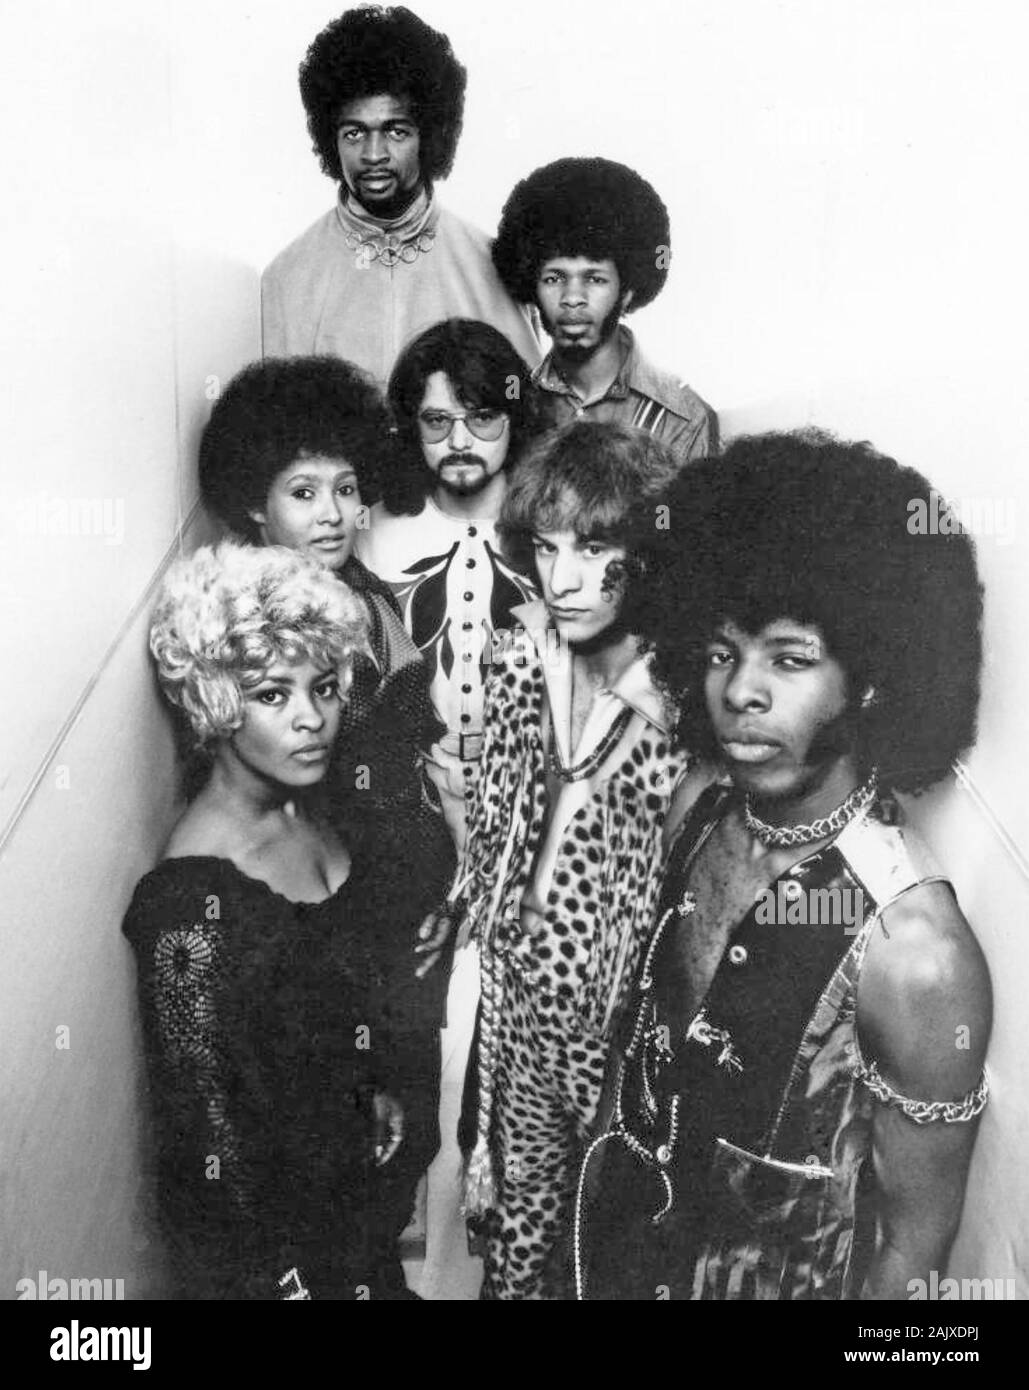 SLY AND THE FAMILY STONE Promotional photo of American group in 1969. Clockwise from top: Larry Graham, Freddie Stone, Greg Errico, Sly Stone, Rose Stone, Cynthia Robinson, Jerry Martini Stock Photo